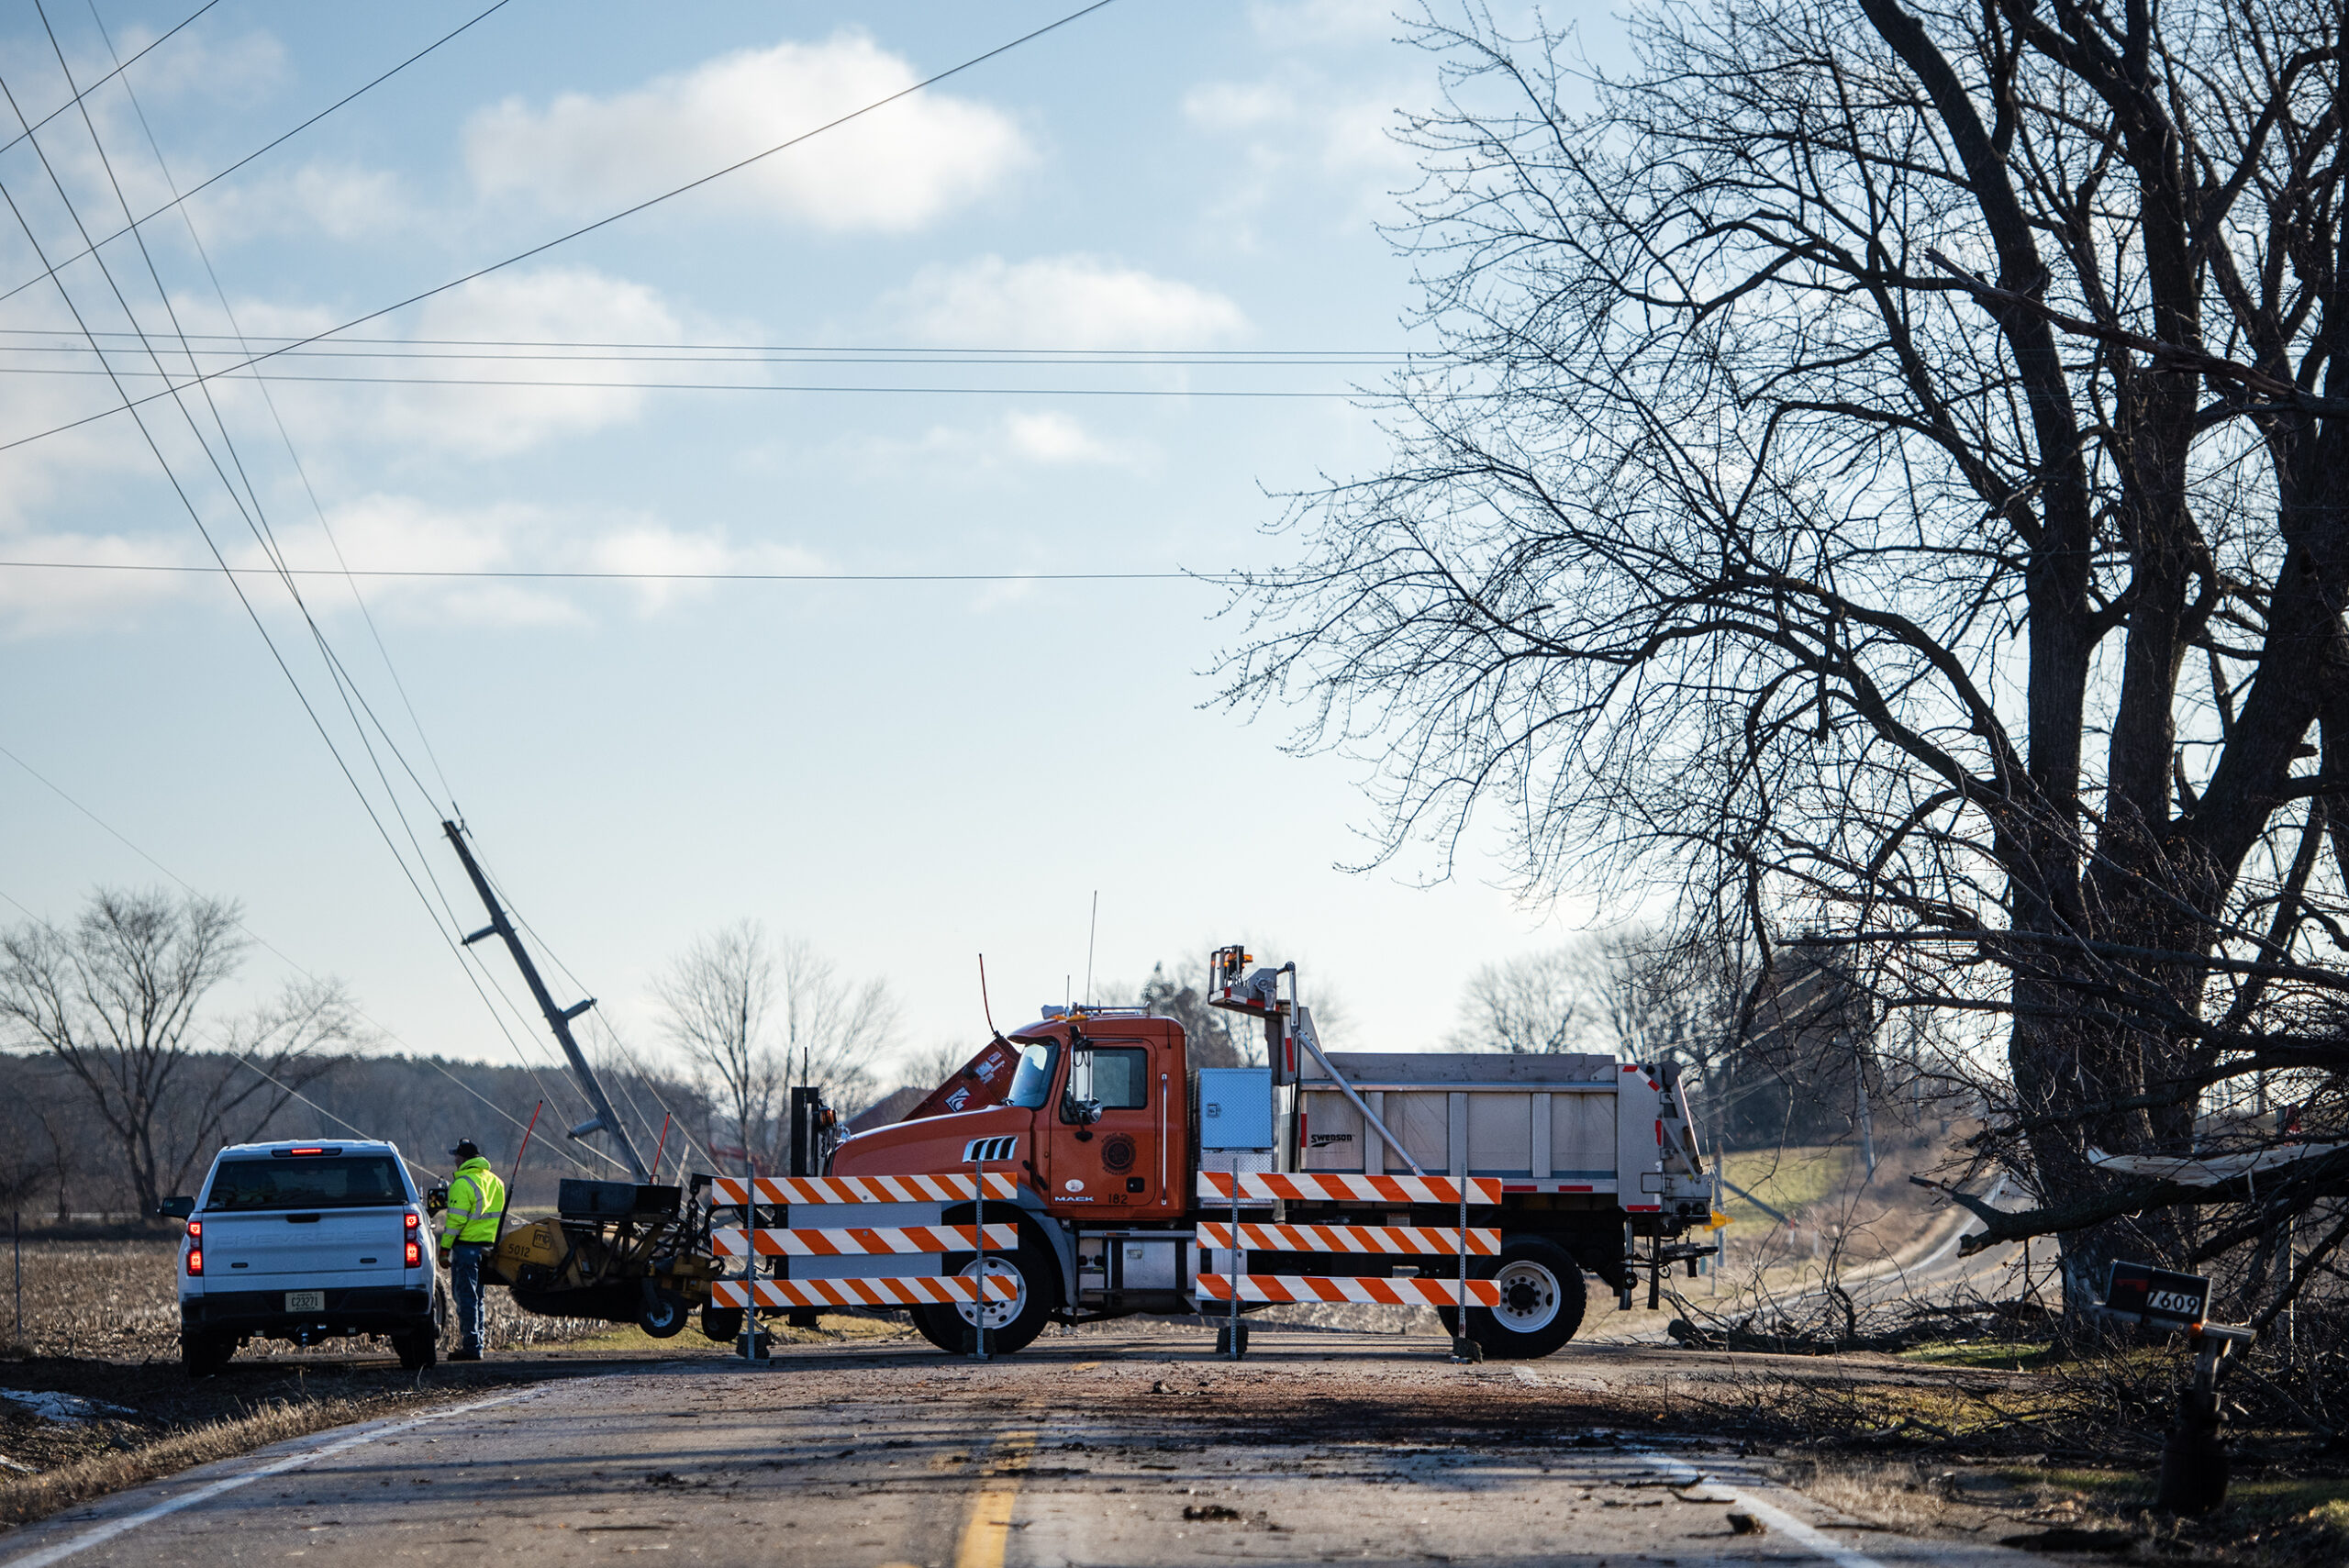 A large truck and barricades block off a road in rural Edgerton, Wis.